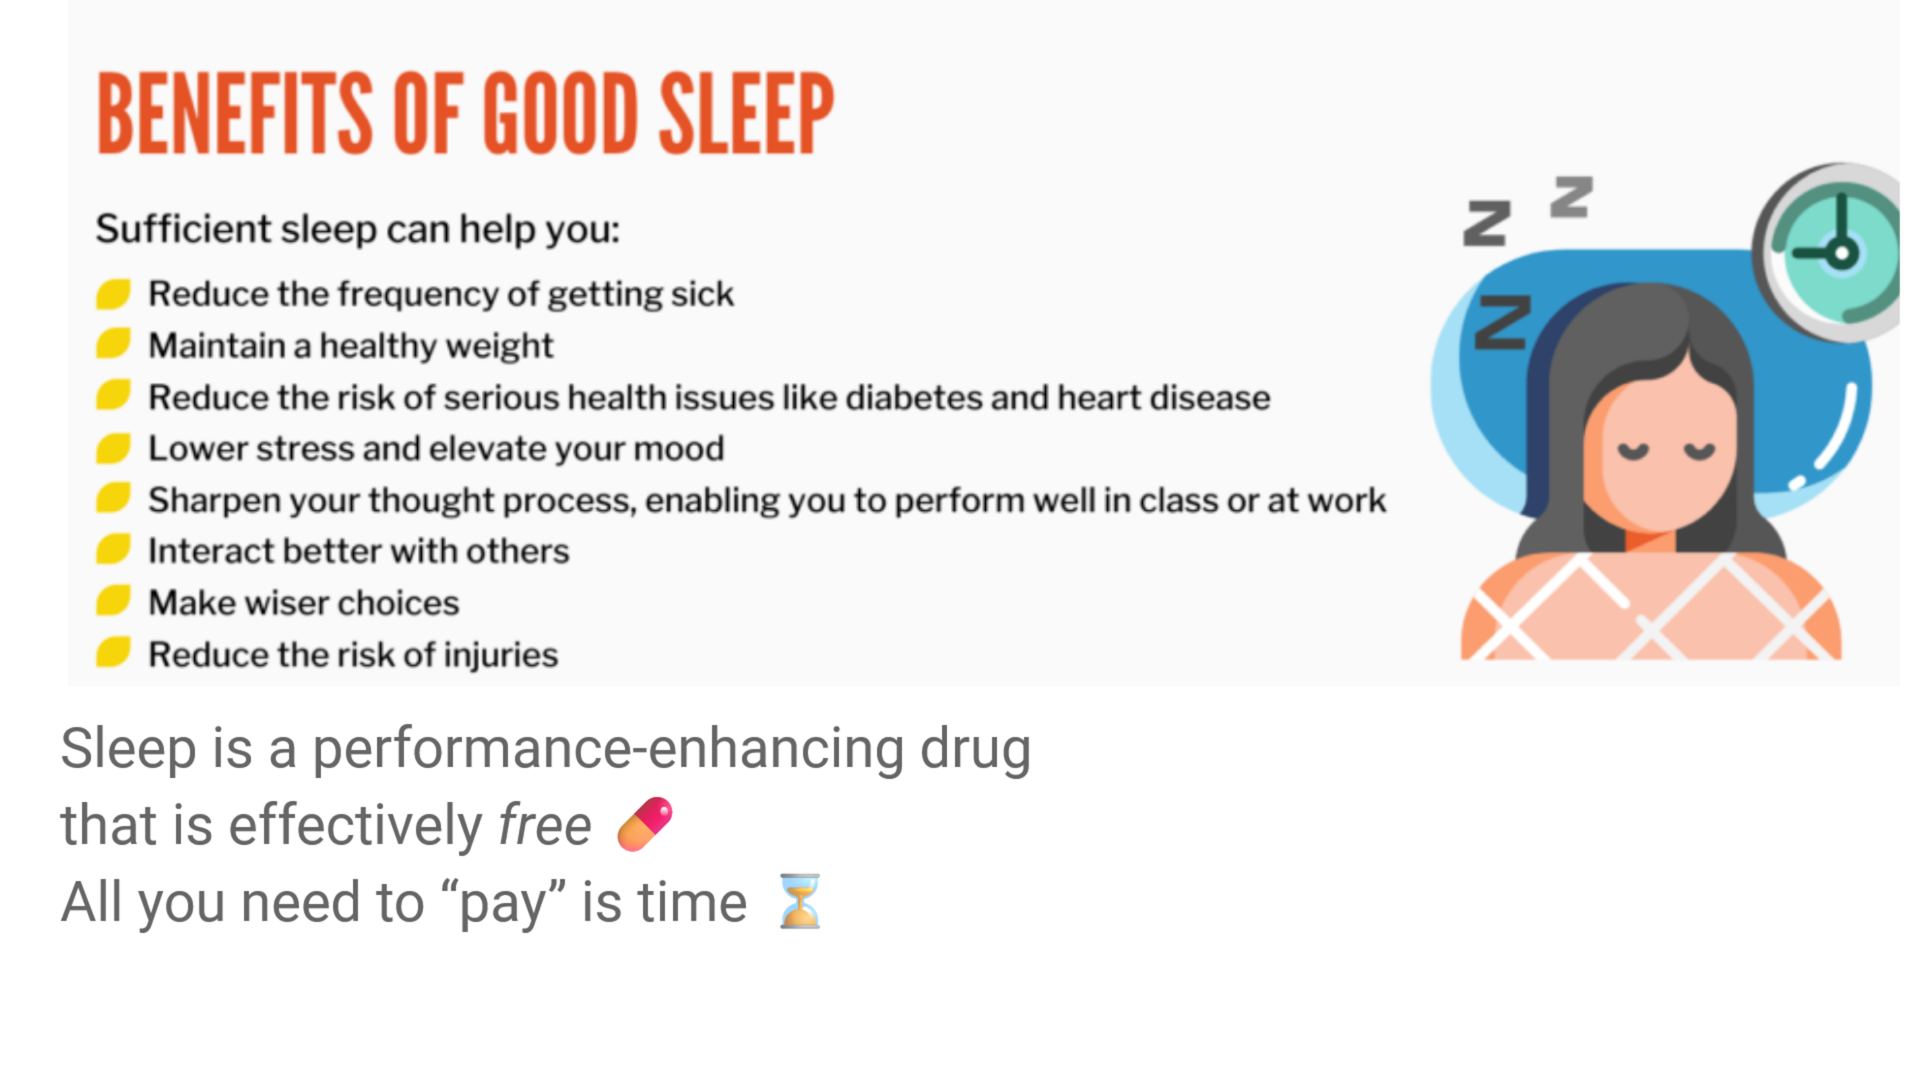 Maximize Your Productivity As A Software Engineer [Part 7] - Get Good Sleep